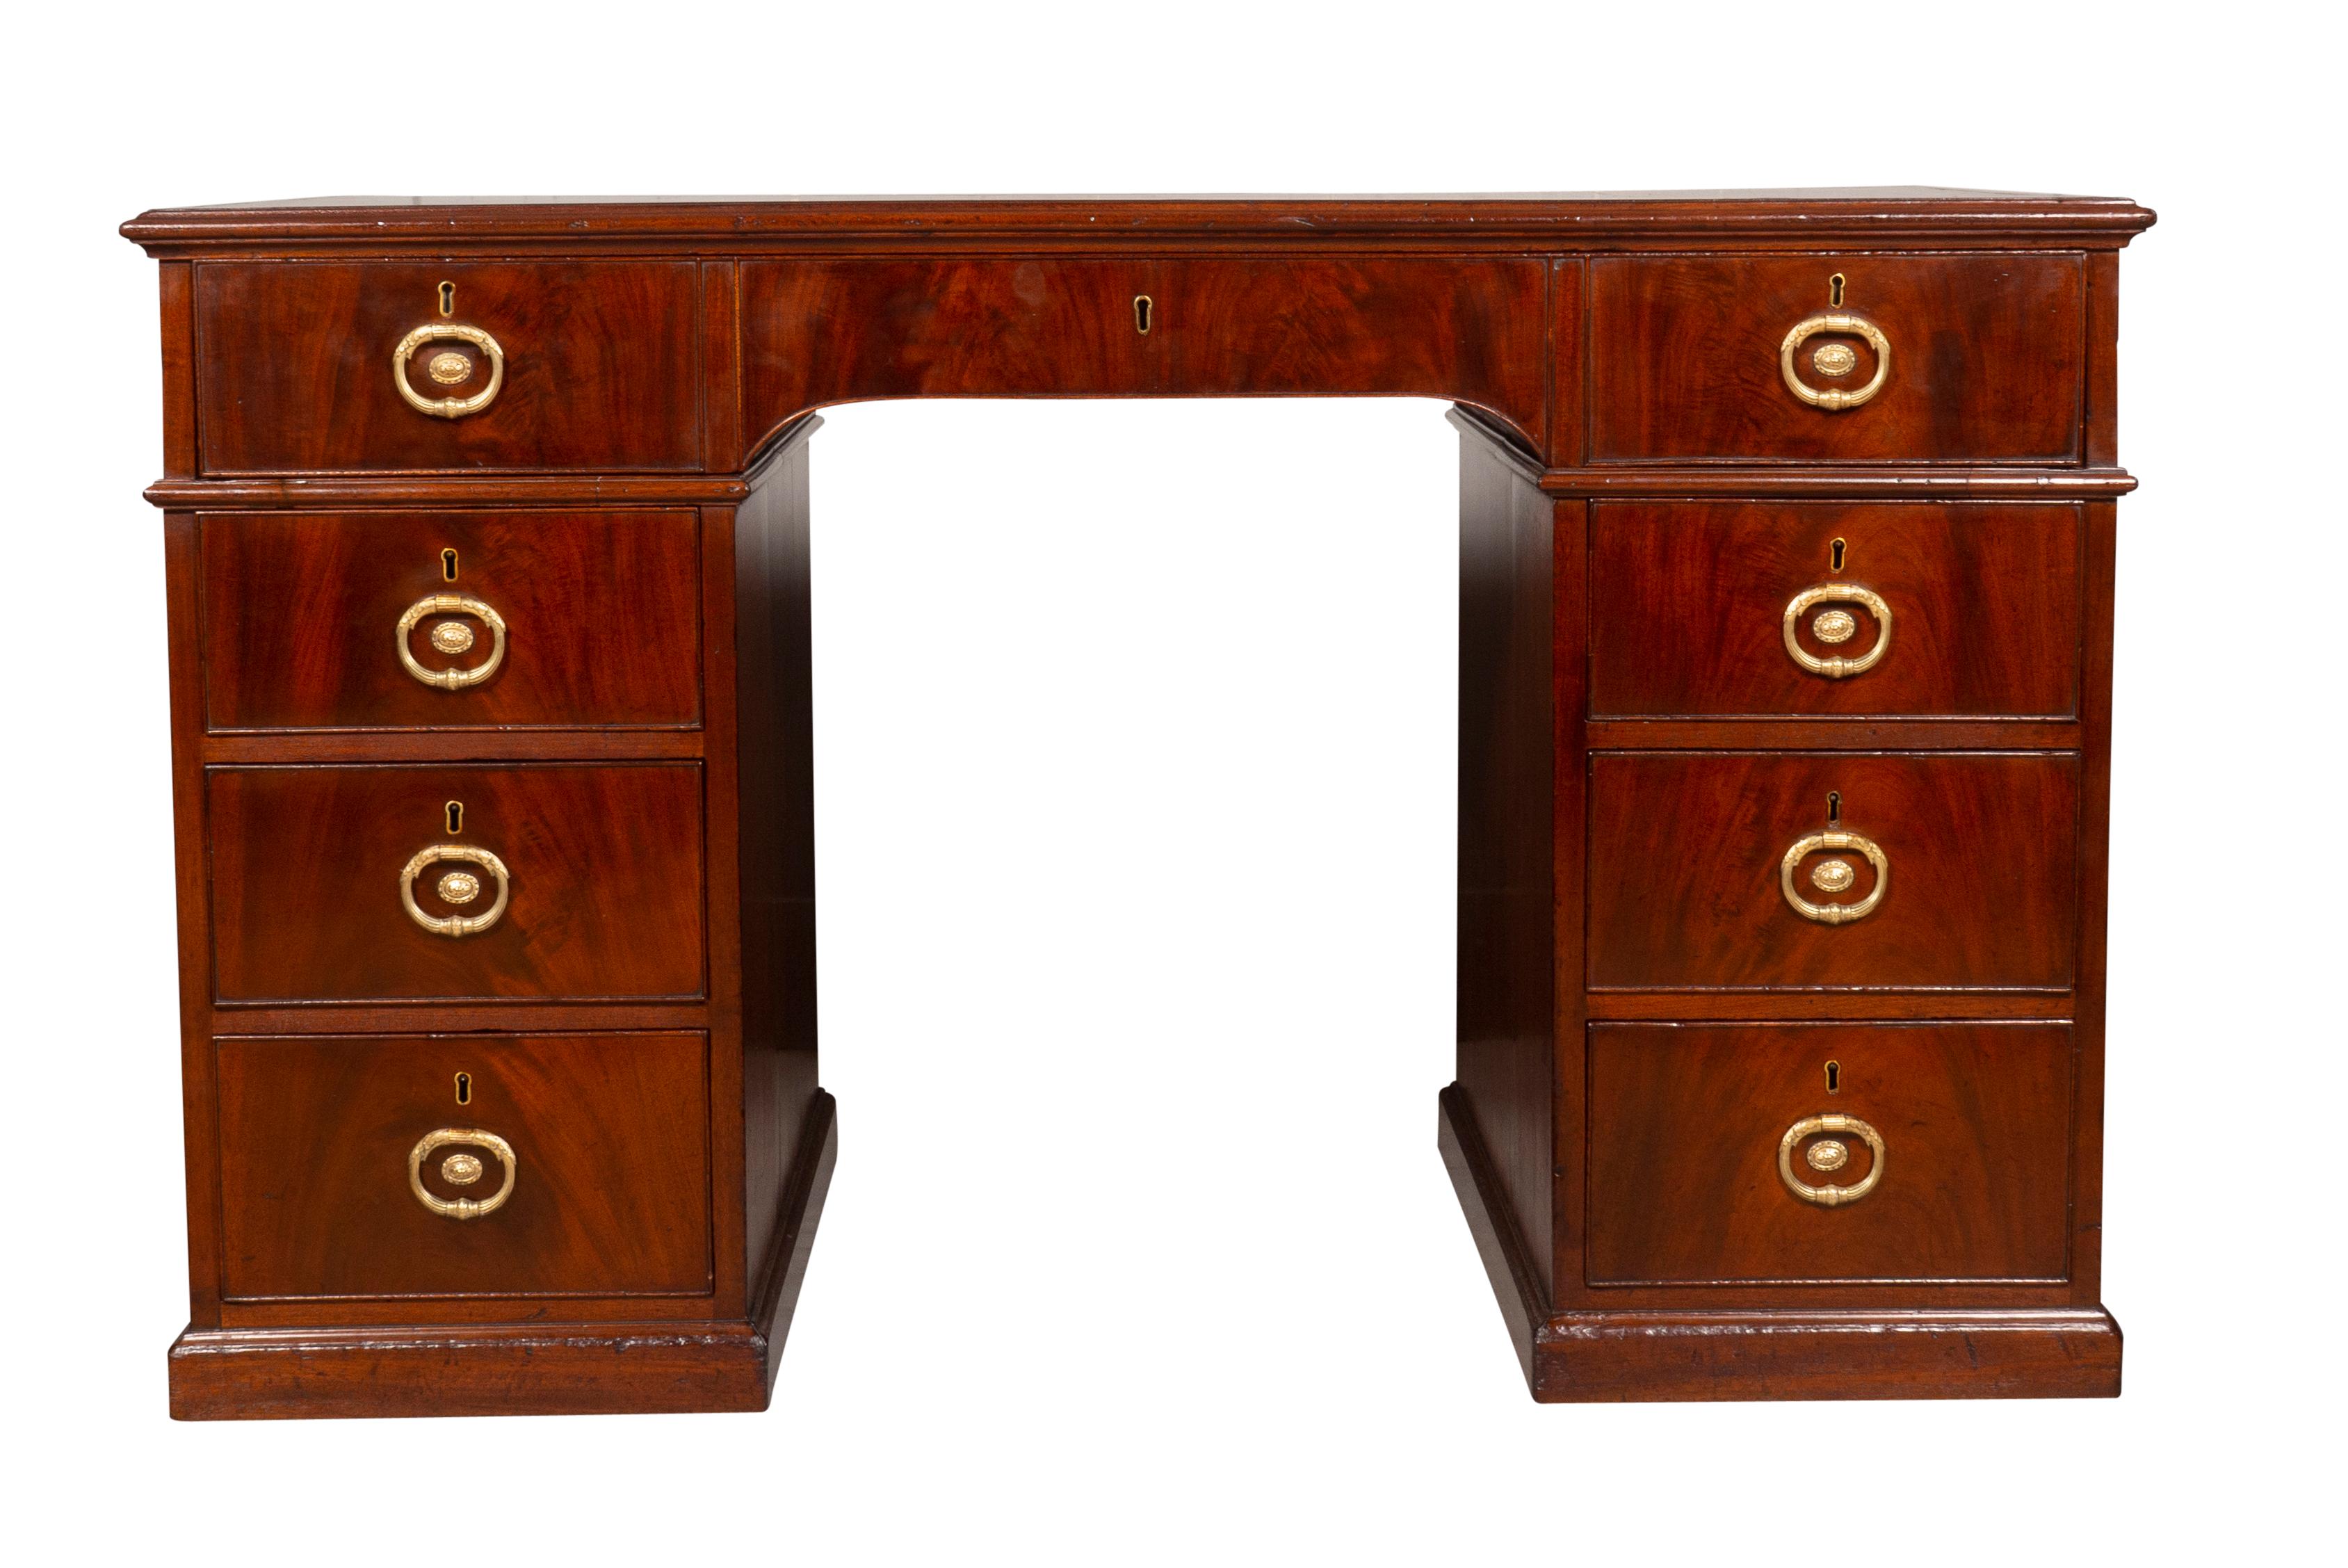 Late 18th Century George III Mahogany Rent Desk by Gillows of Lancaster For Sale